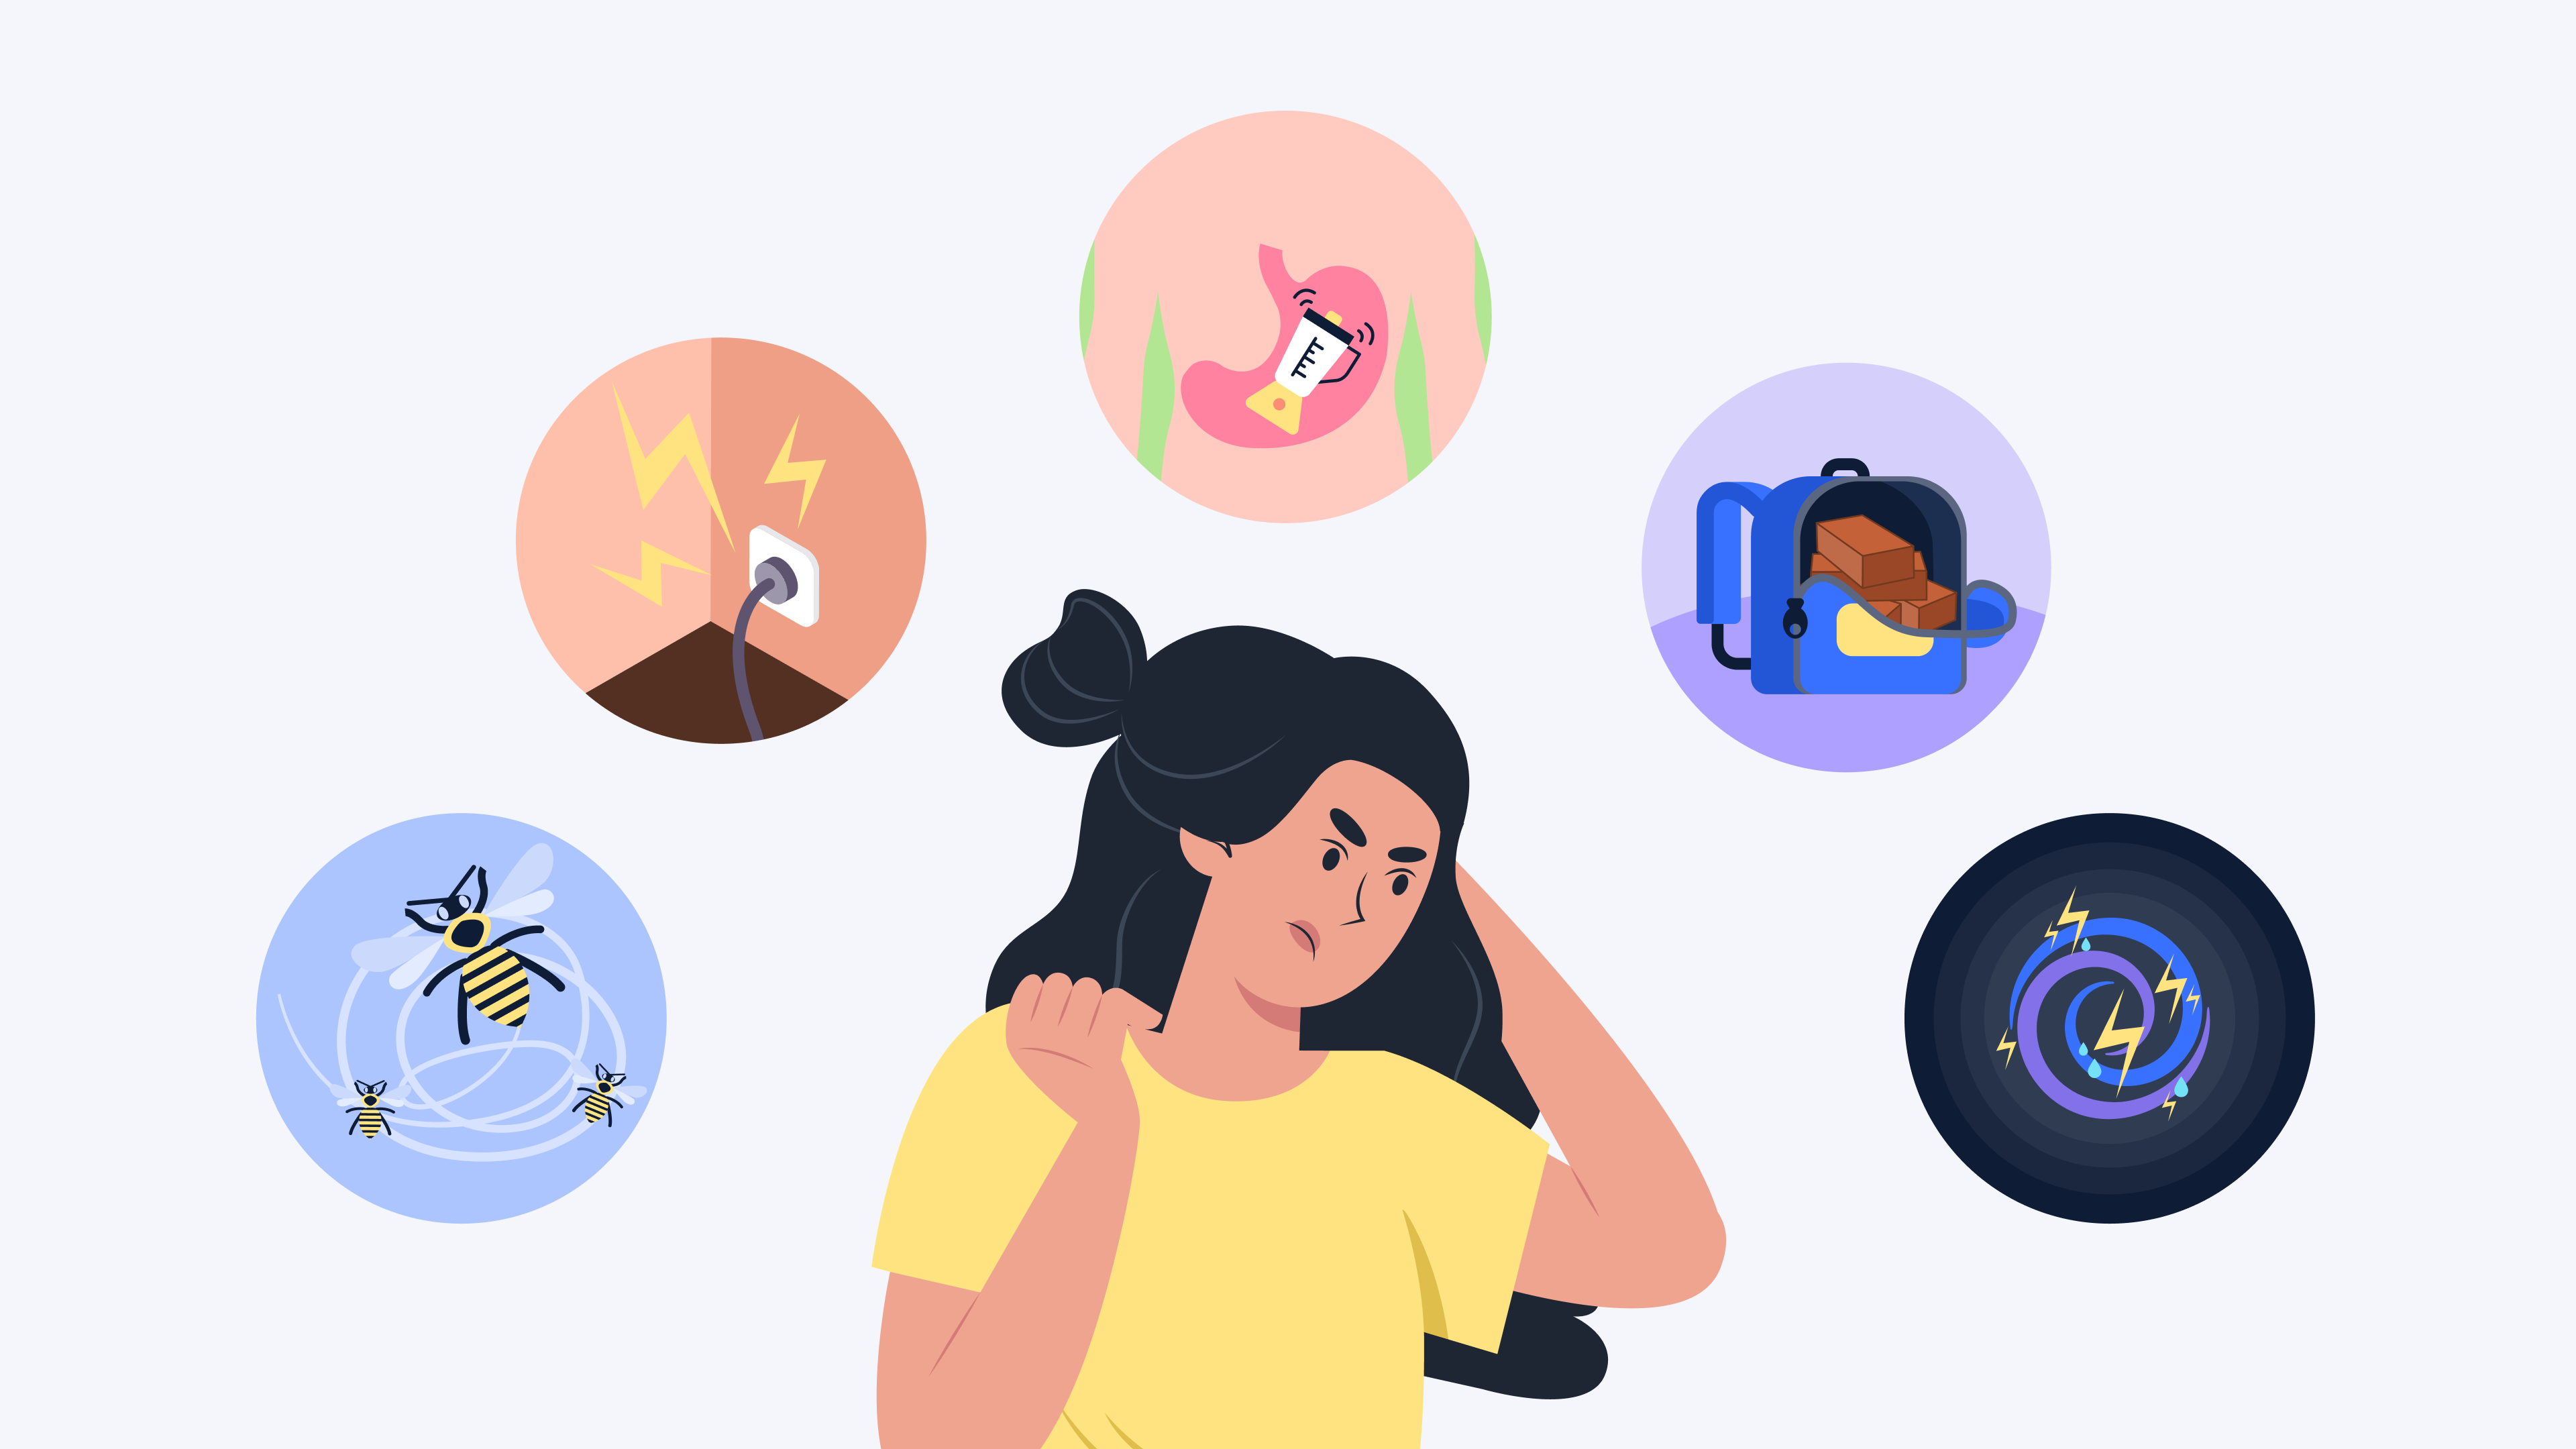 A girl with a sad look on her face is surrounded by icons showing anxiety symptoms